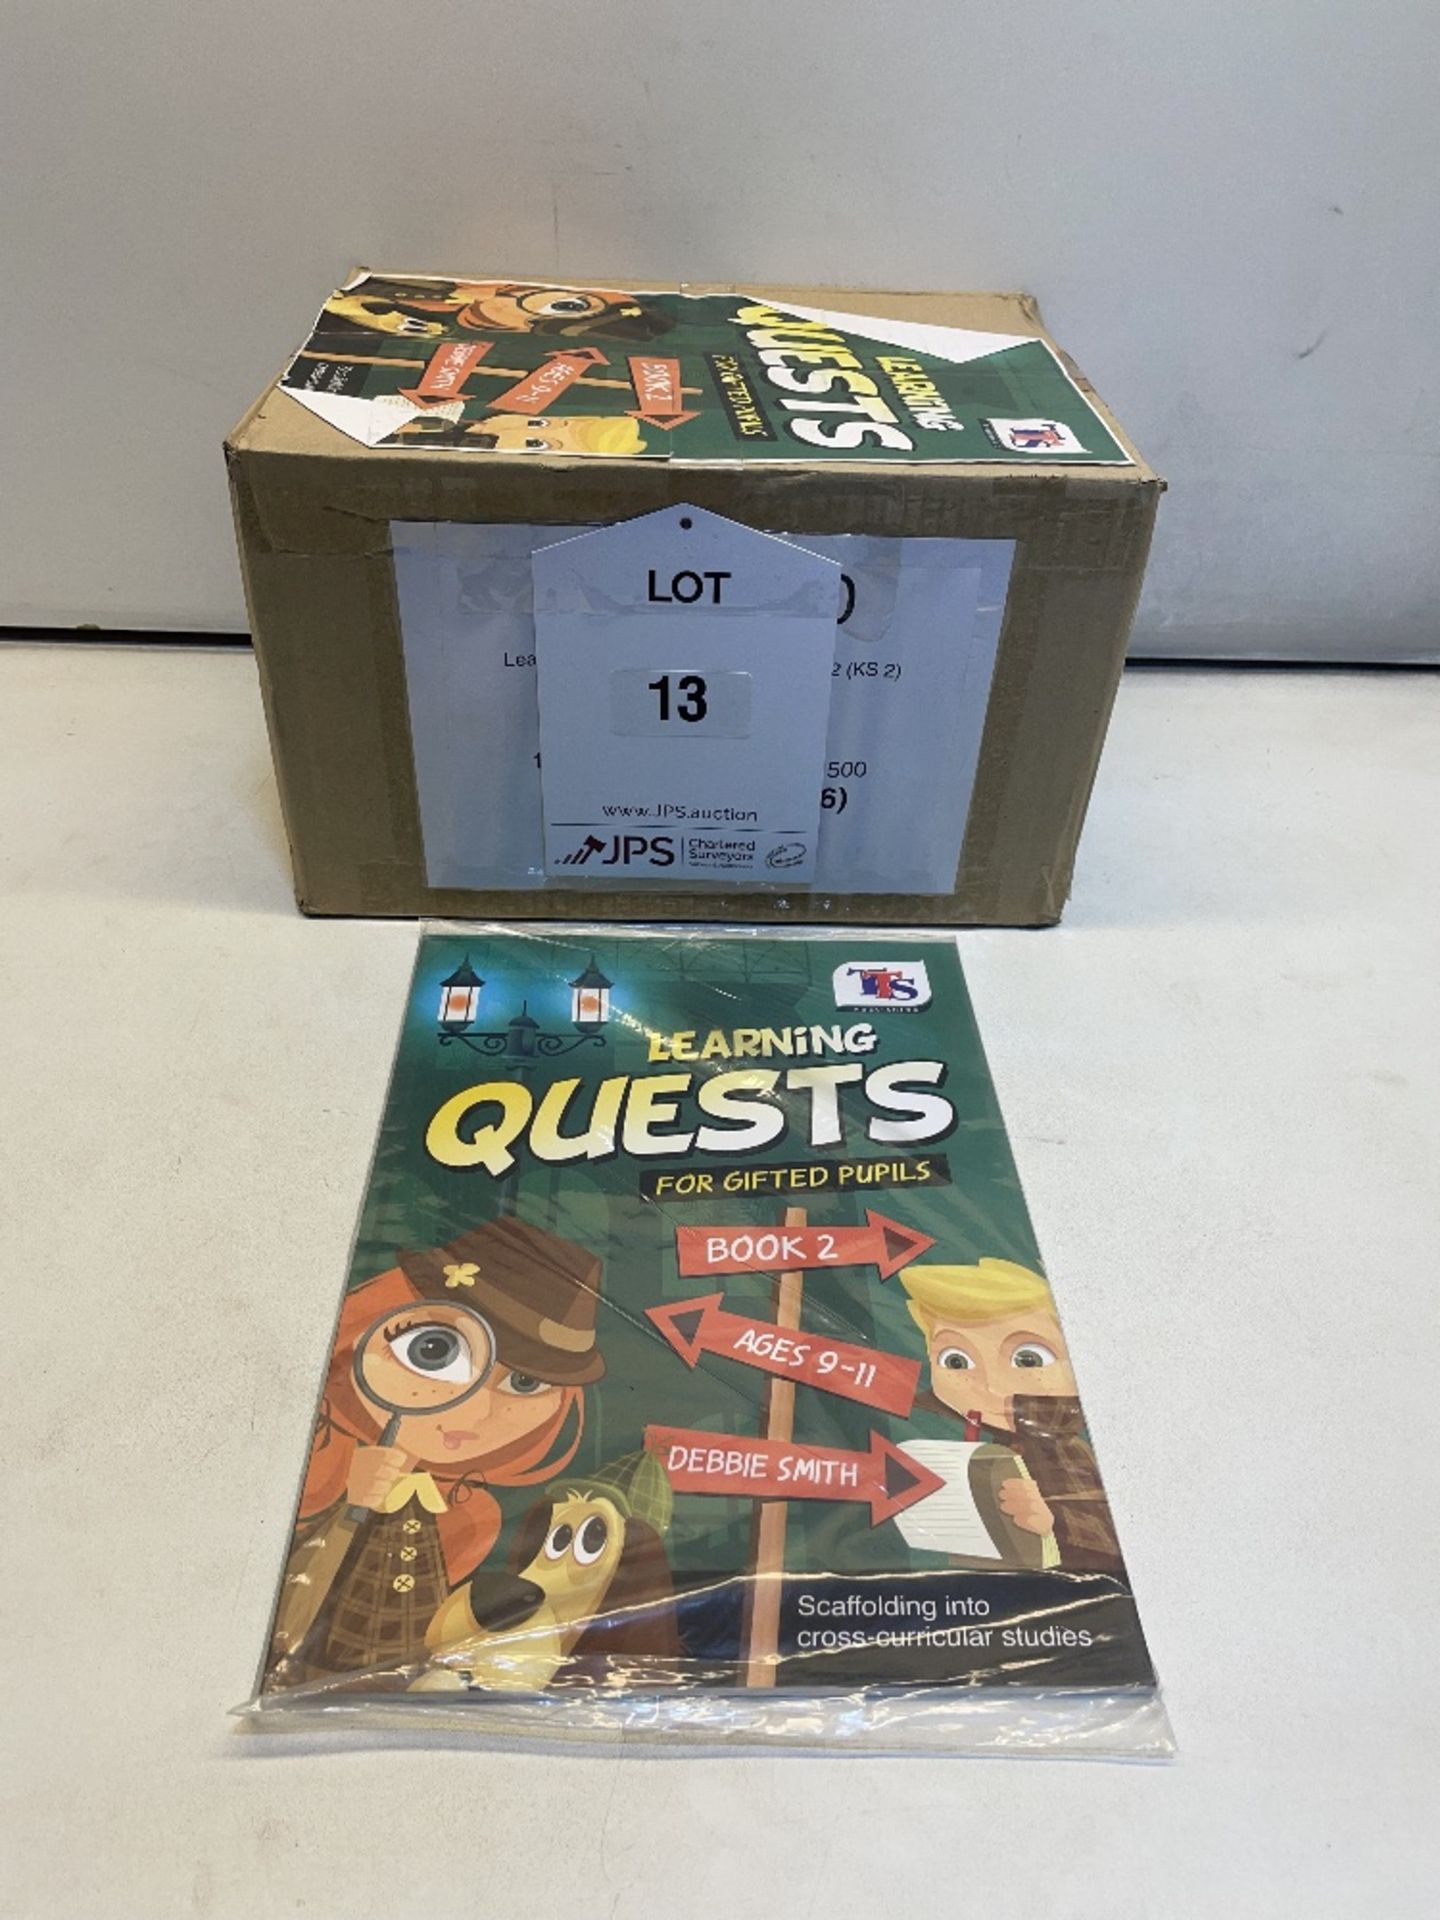 Approximately 355 x TTS Publishing PB00130 Age 9-11 'Learning Quests for Gifted Pupils' Book 2 Textb